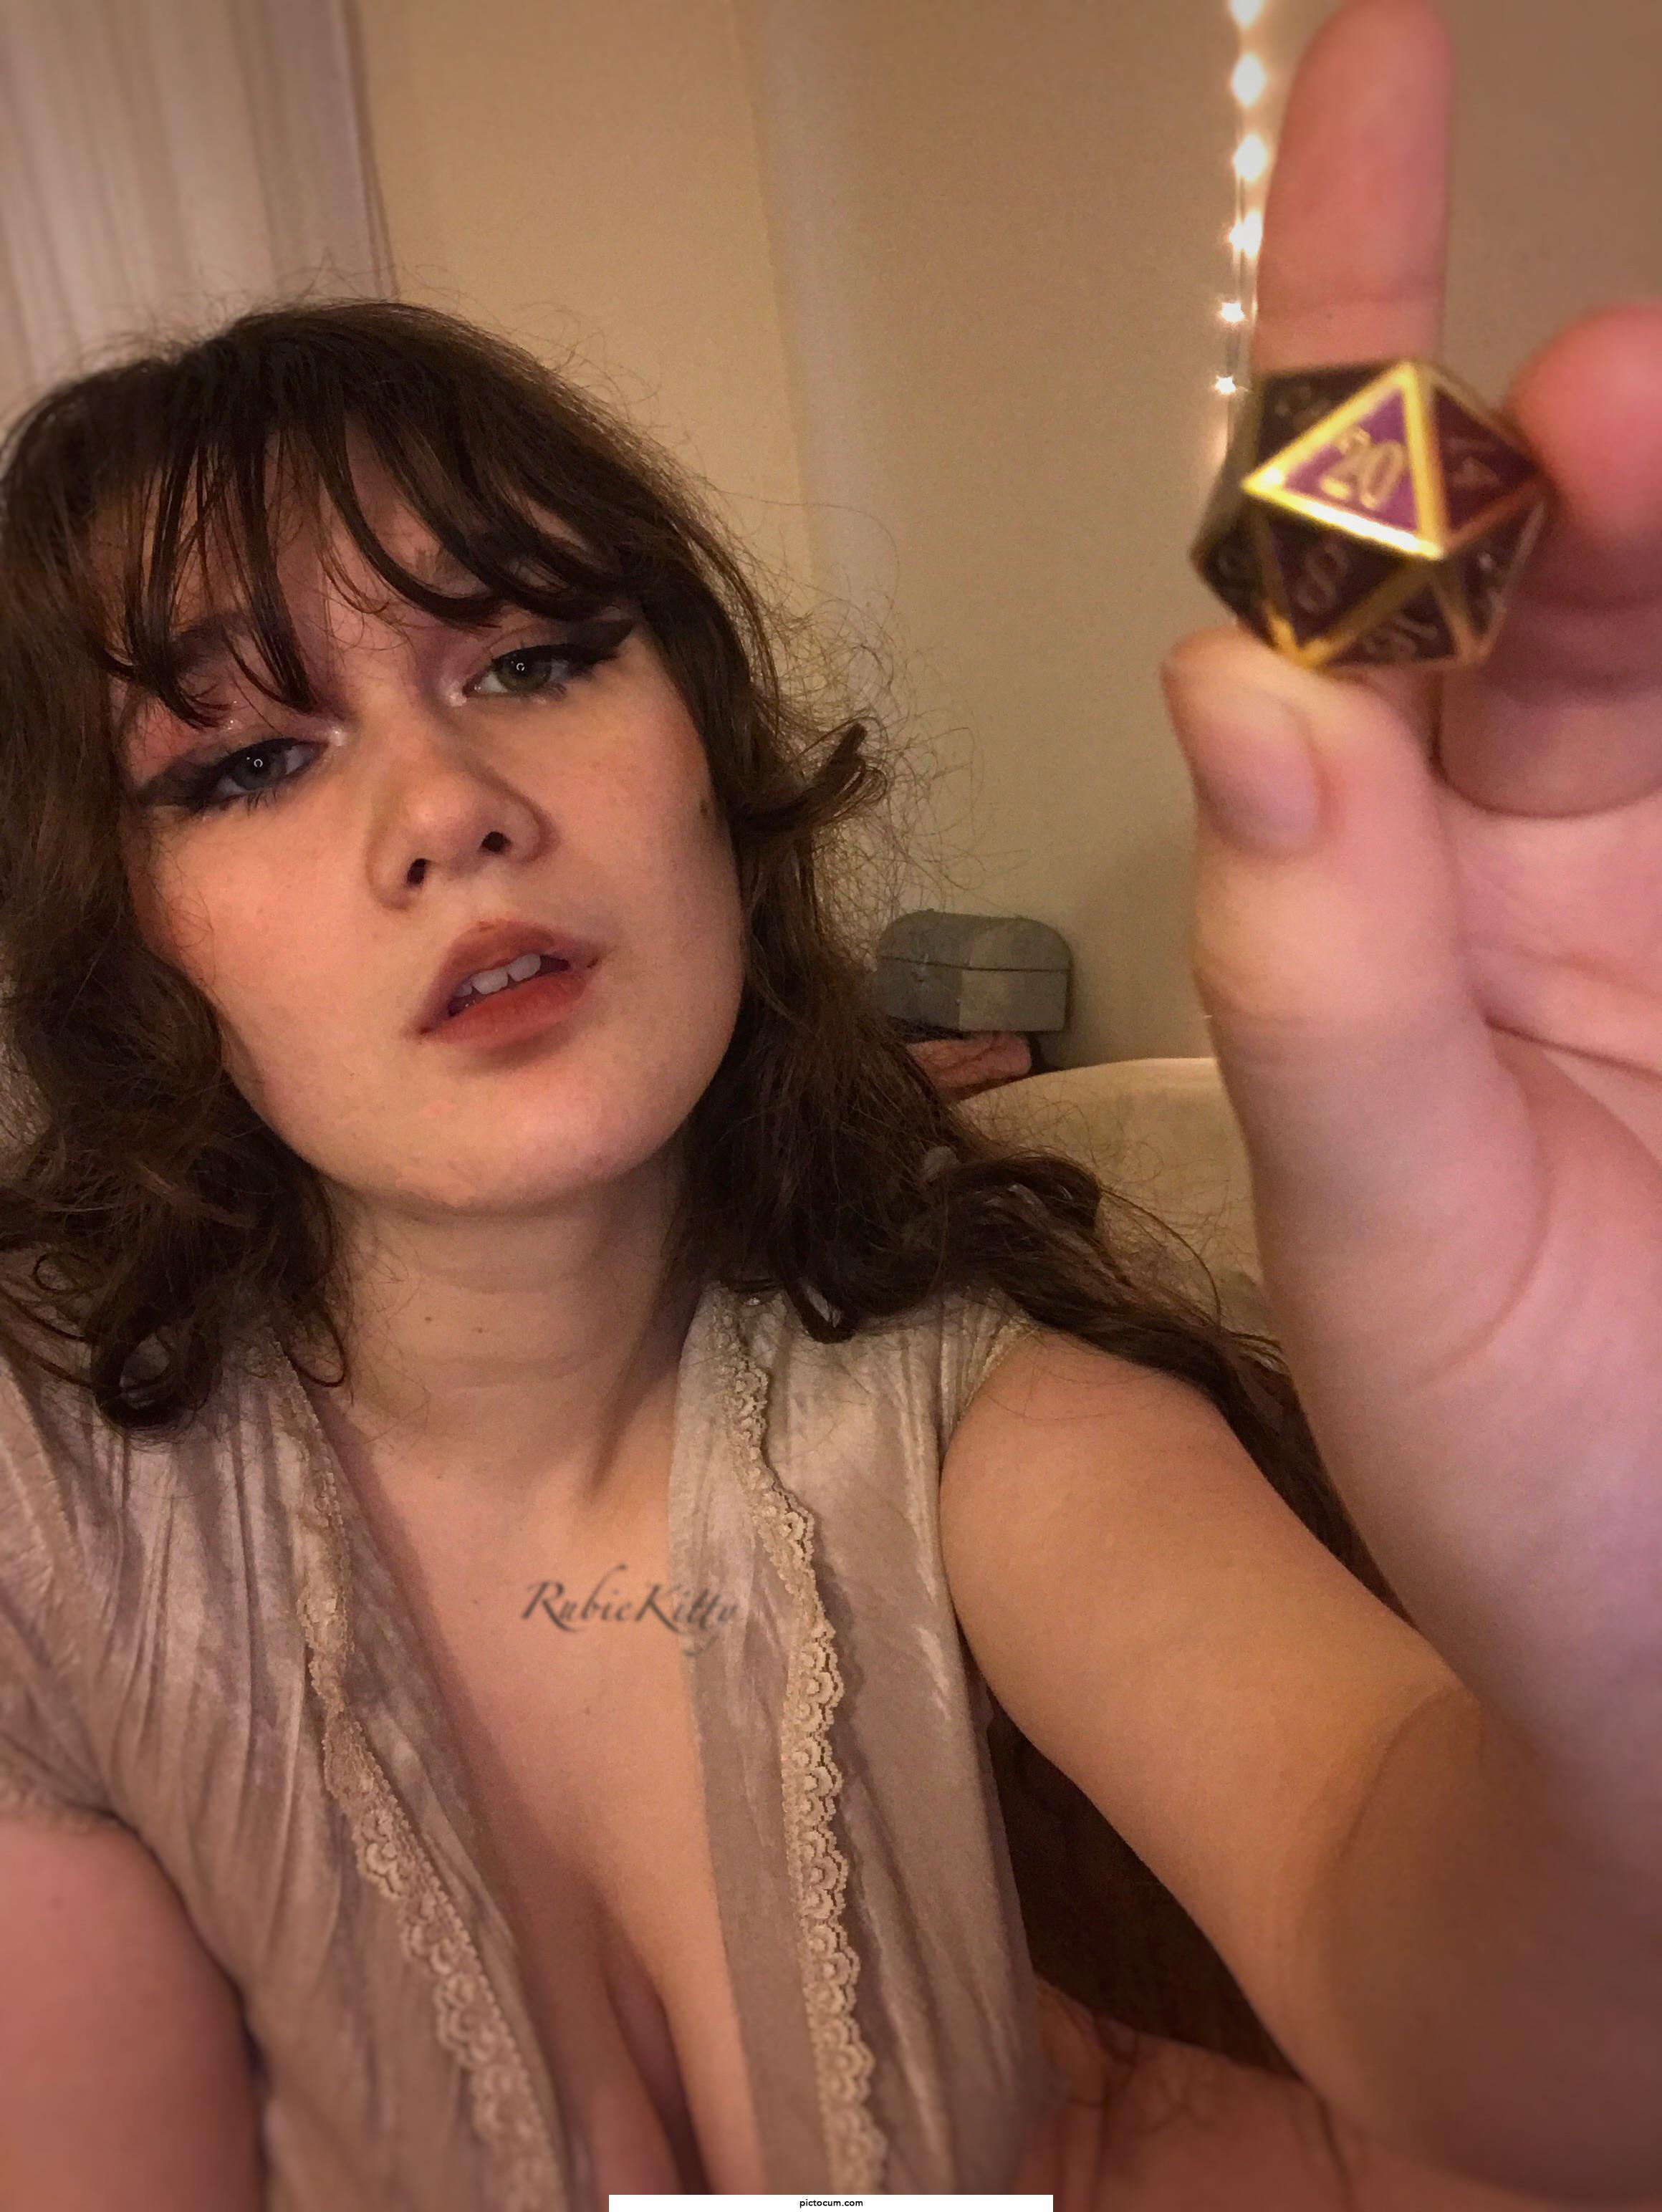 I rolled a nat 20 on my charisma check to seduce… did it work?😜